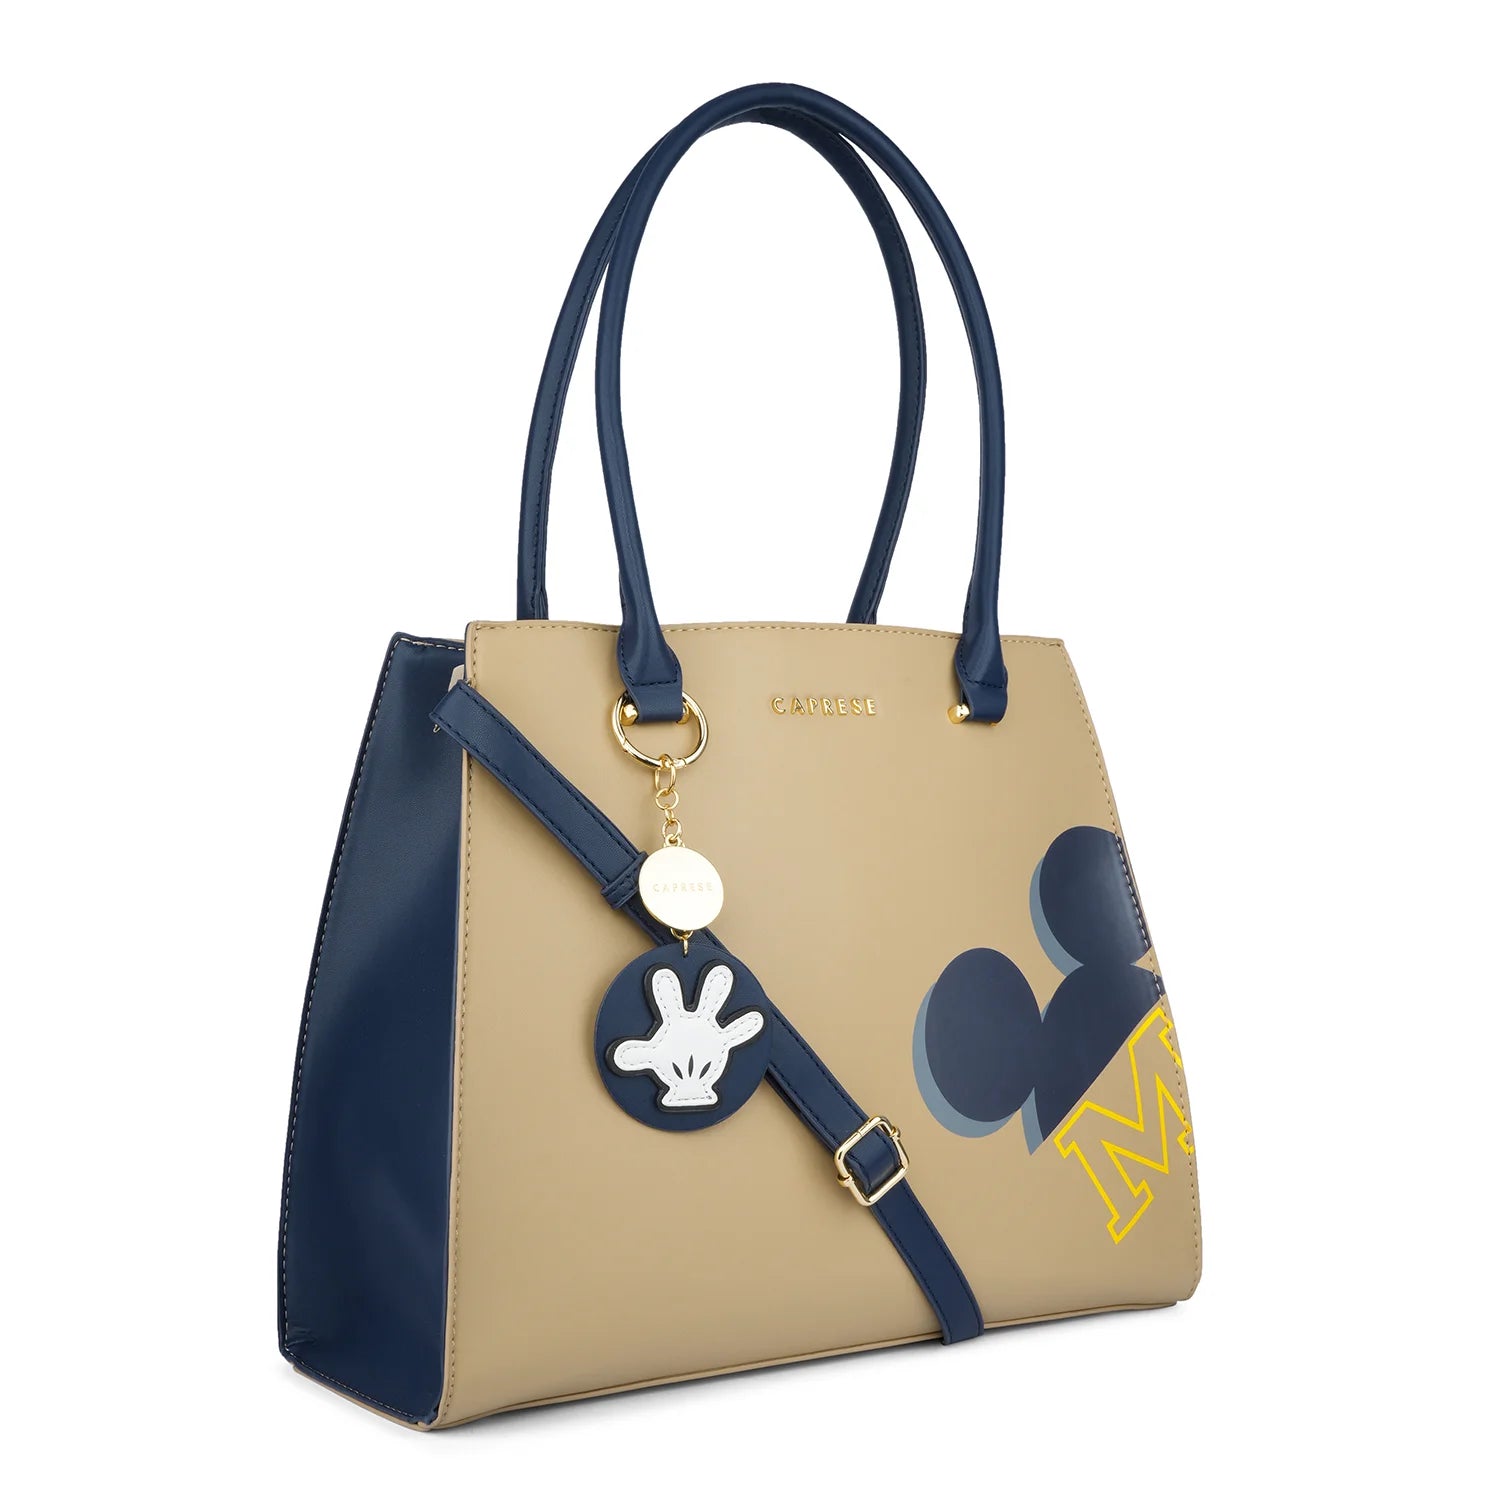 Caprese Disney Inspired Printed Mickey Mouse Collection Satchel Large Handbag